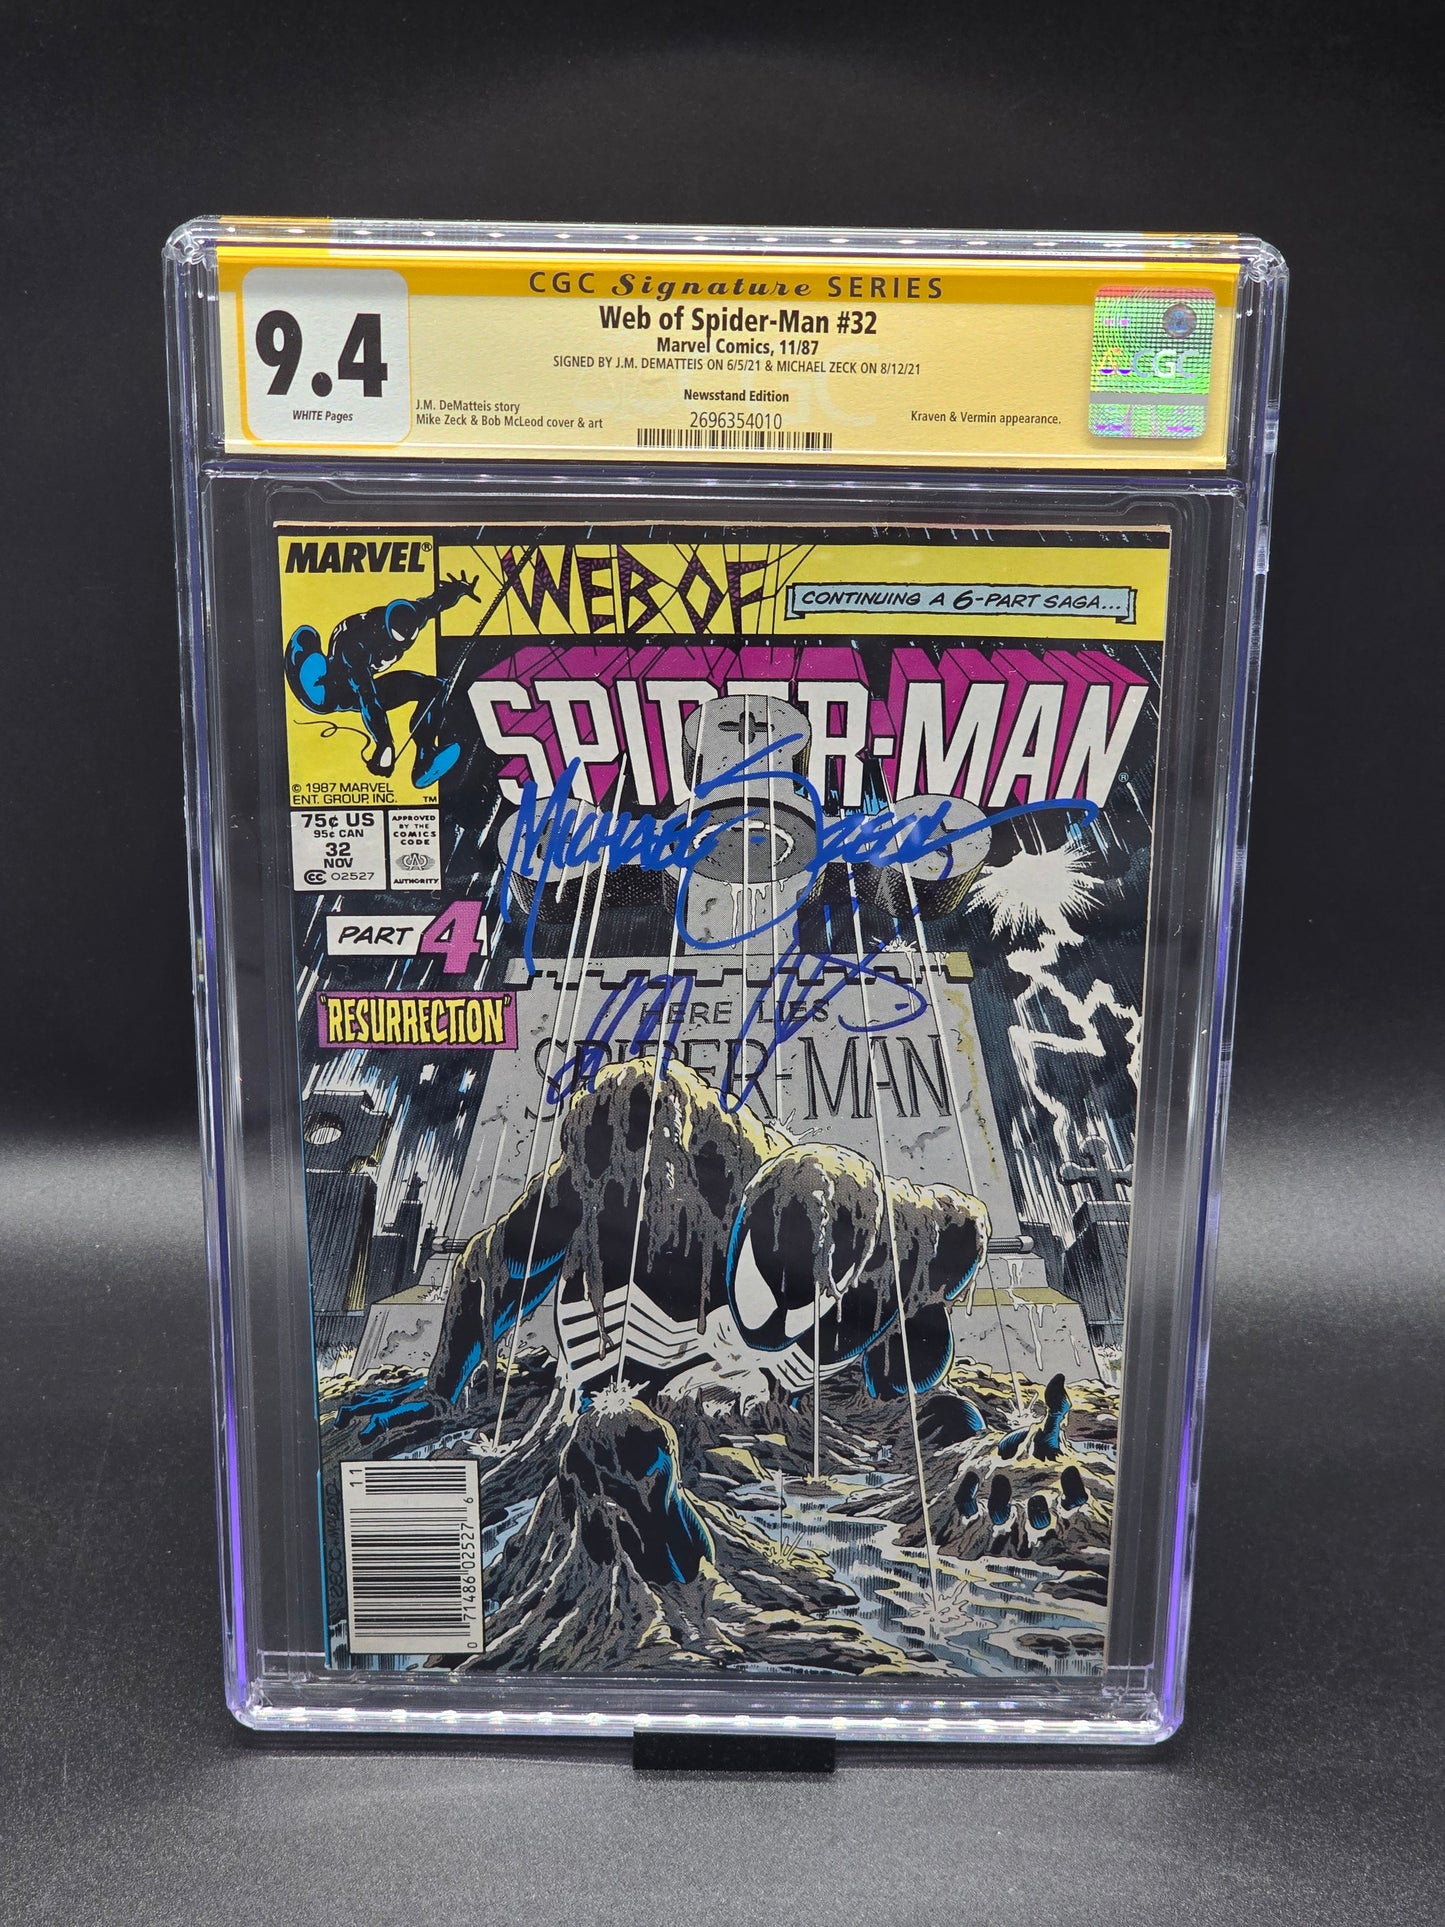 Web of Spider-Man #32 1987 CGC SS 9.4 signed by J.M. DeMatteis and Michael Zeck